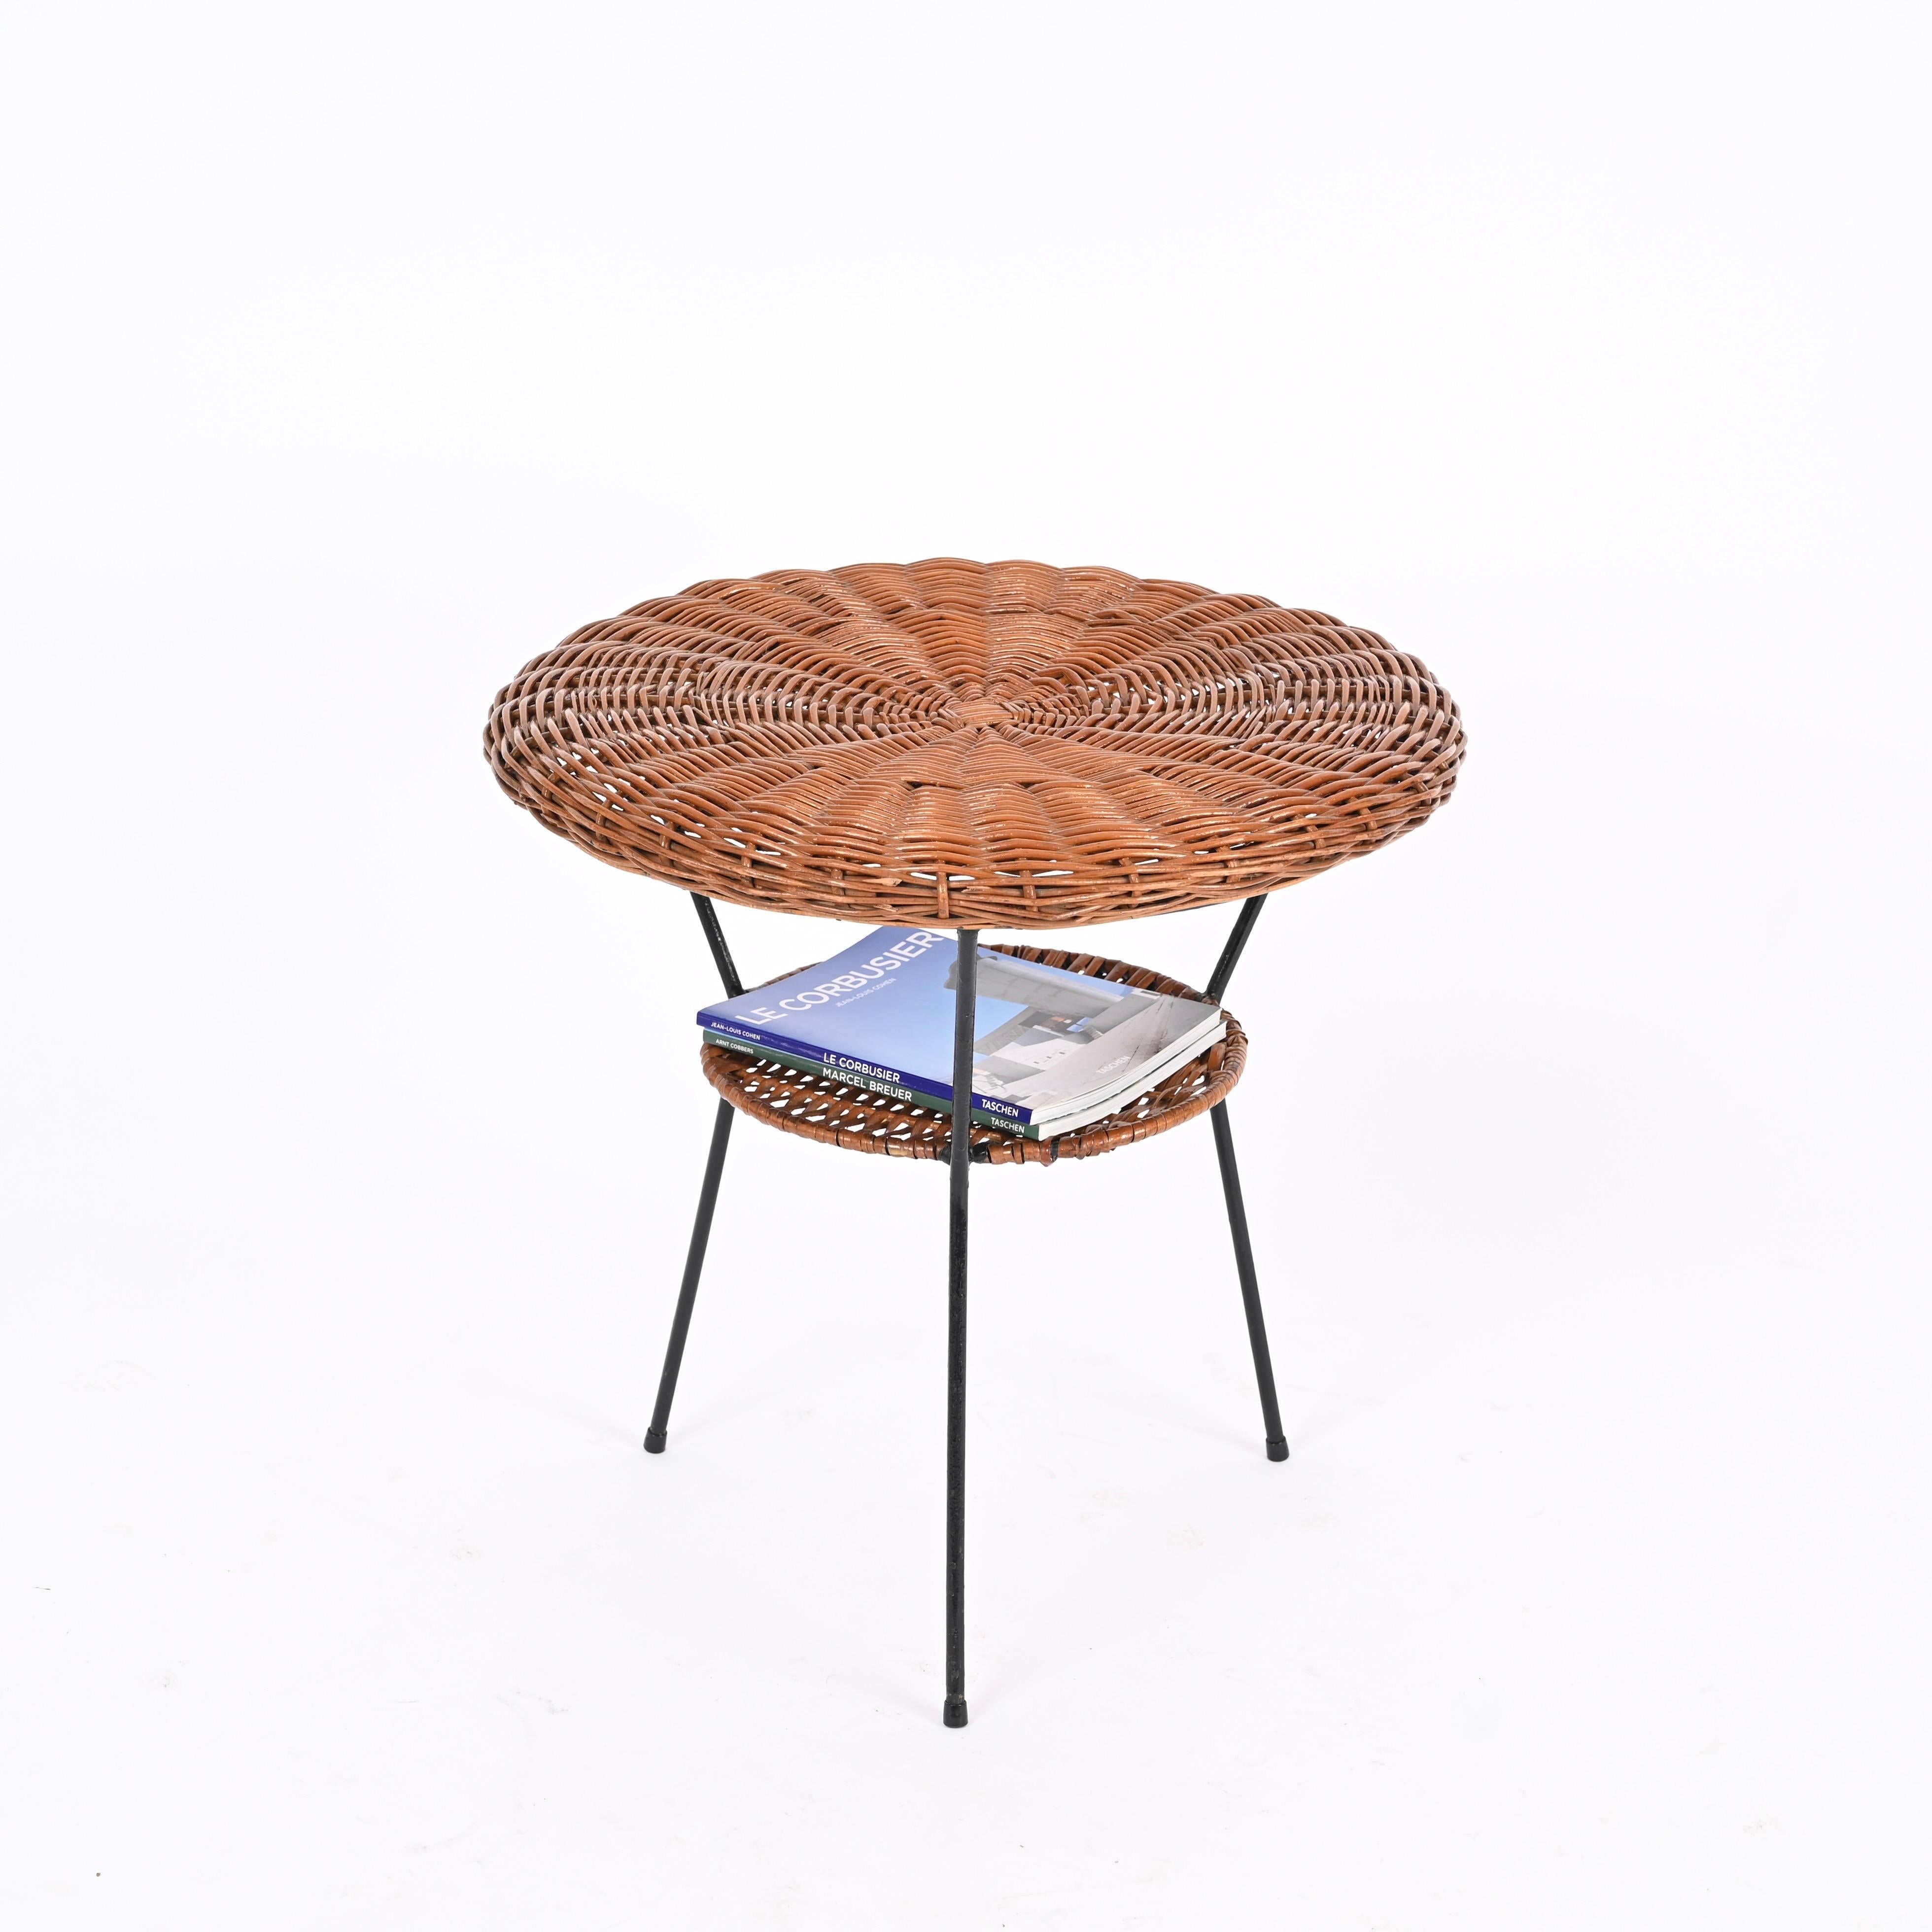 Woven Rattan, Wicker and Iron Two-Tier Round Coffee Table, Matégot, France 1960s For Sale 1